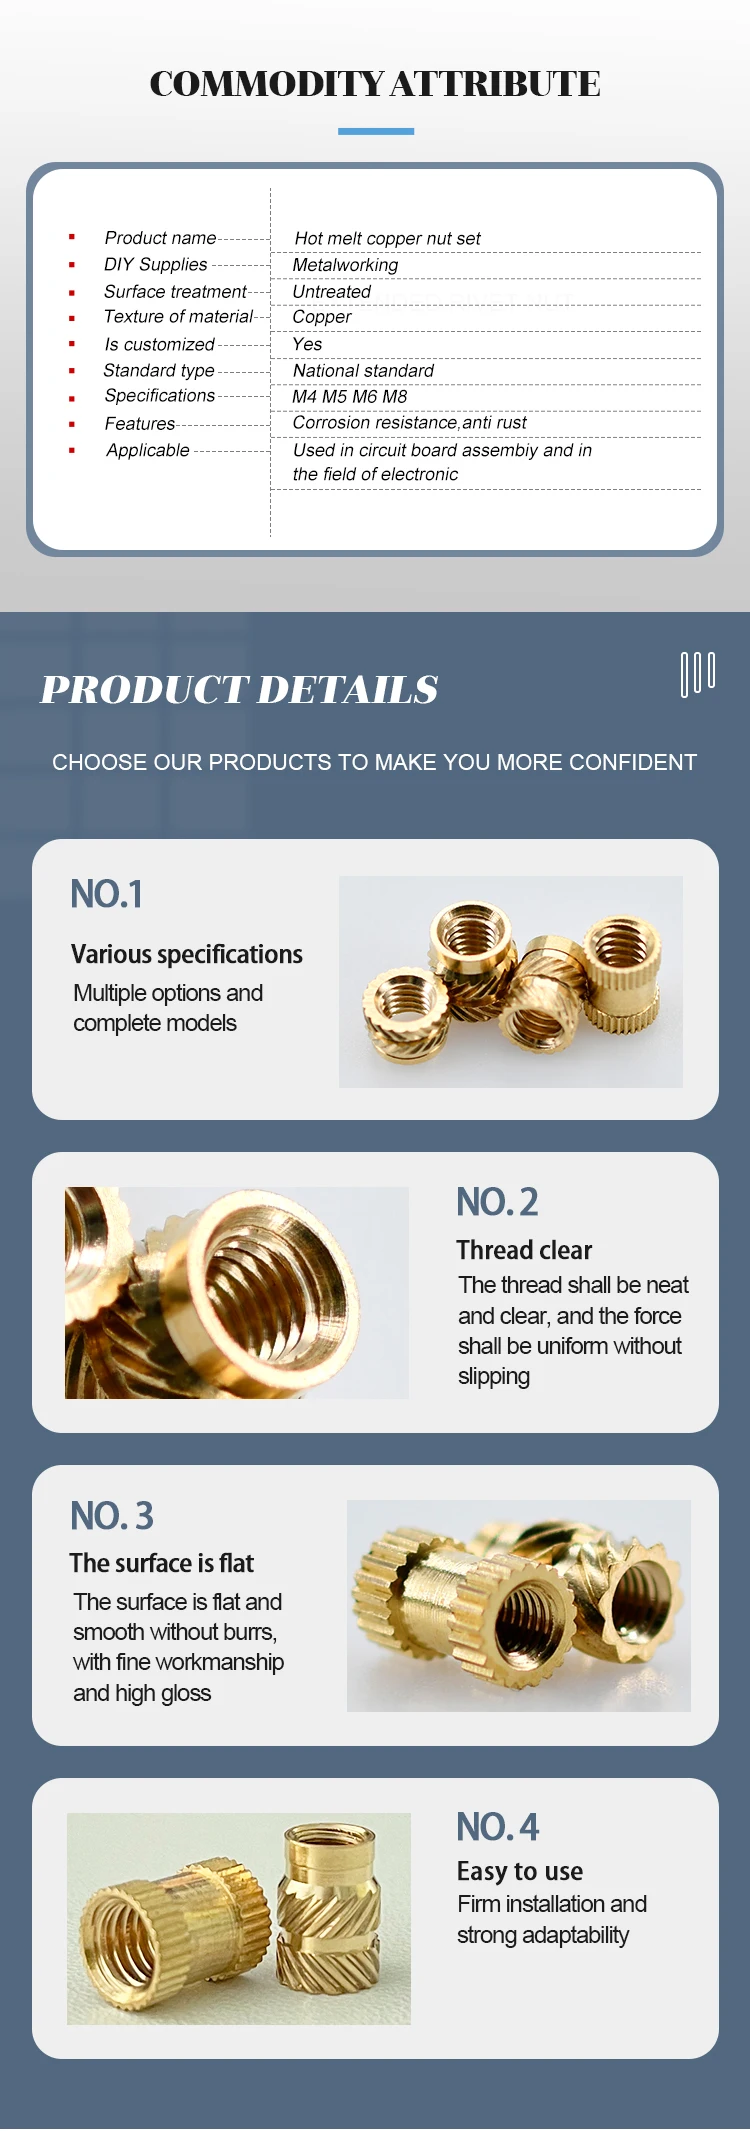 20/30PCS 1/4 Brass Heat Threaded Insert Nut Inch Size Knurled Hot Melt Molding Injection Embedded Insertion Nut of 3D Printer